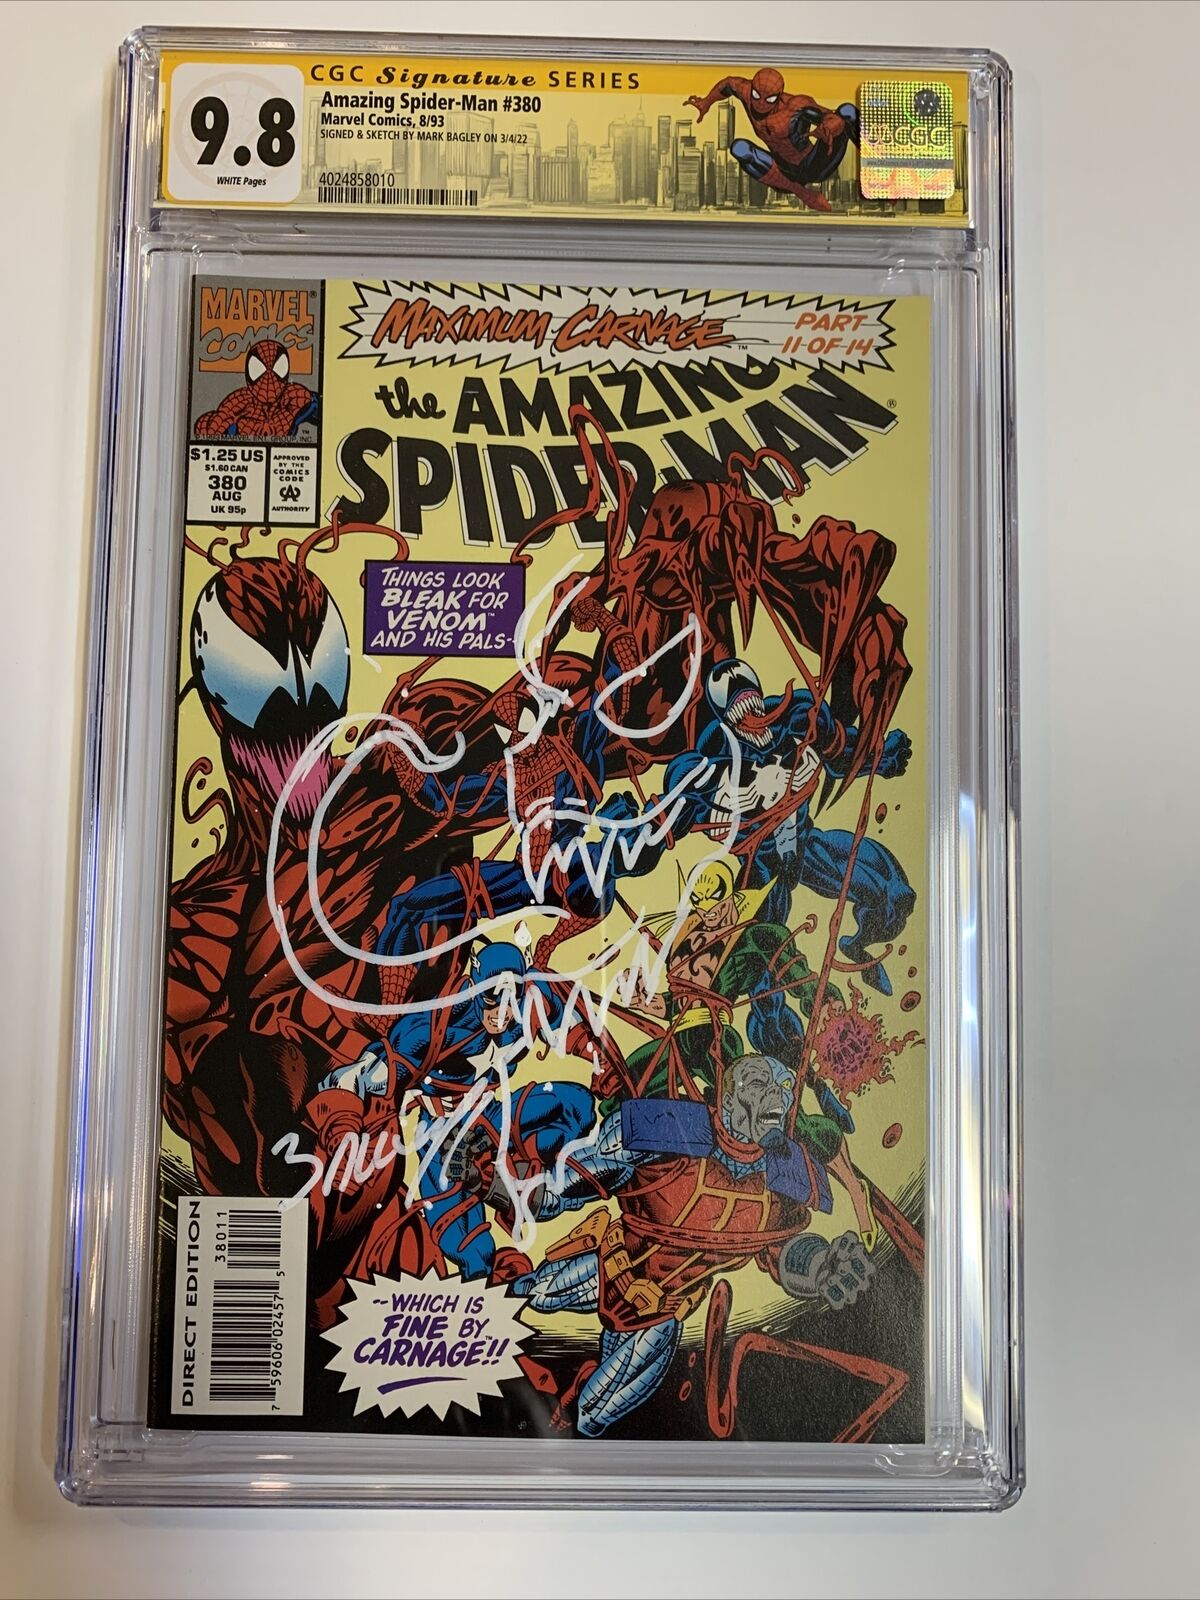 Image 1 - Amazing Spider-Man (1993) # 380 (CGC SS 9.8) Signed &amp; Sketch Mark Bailey